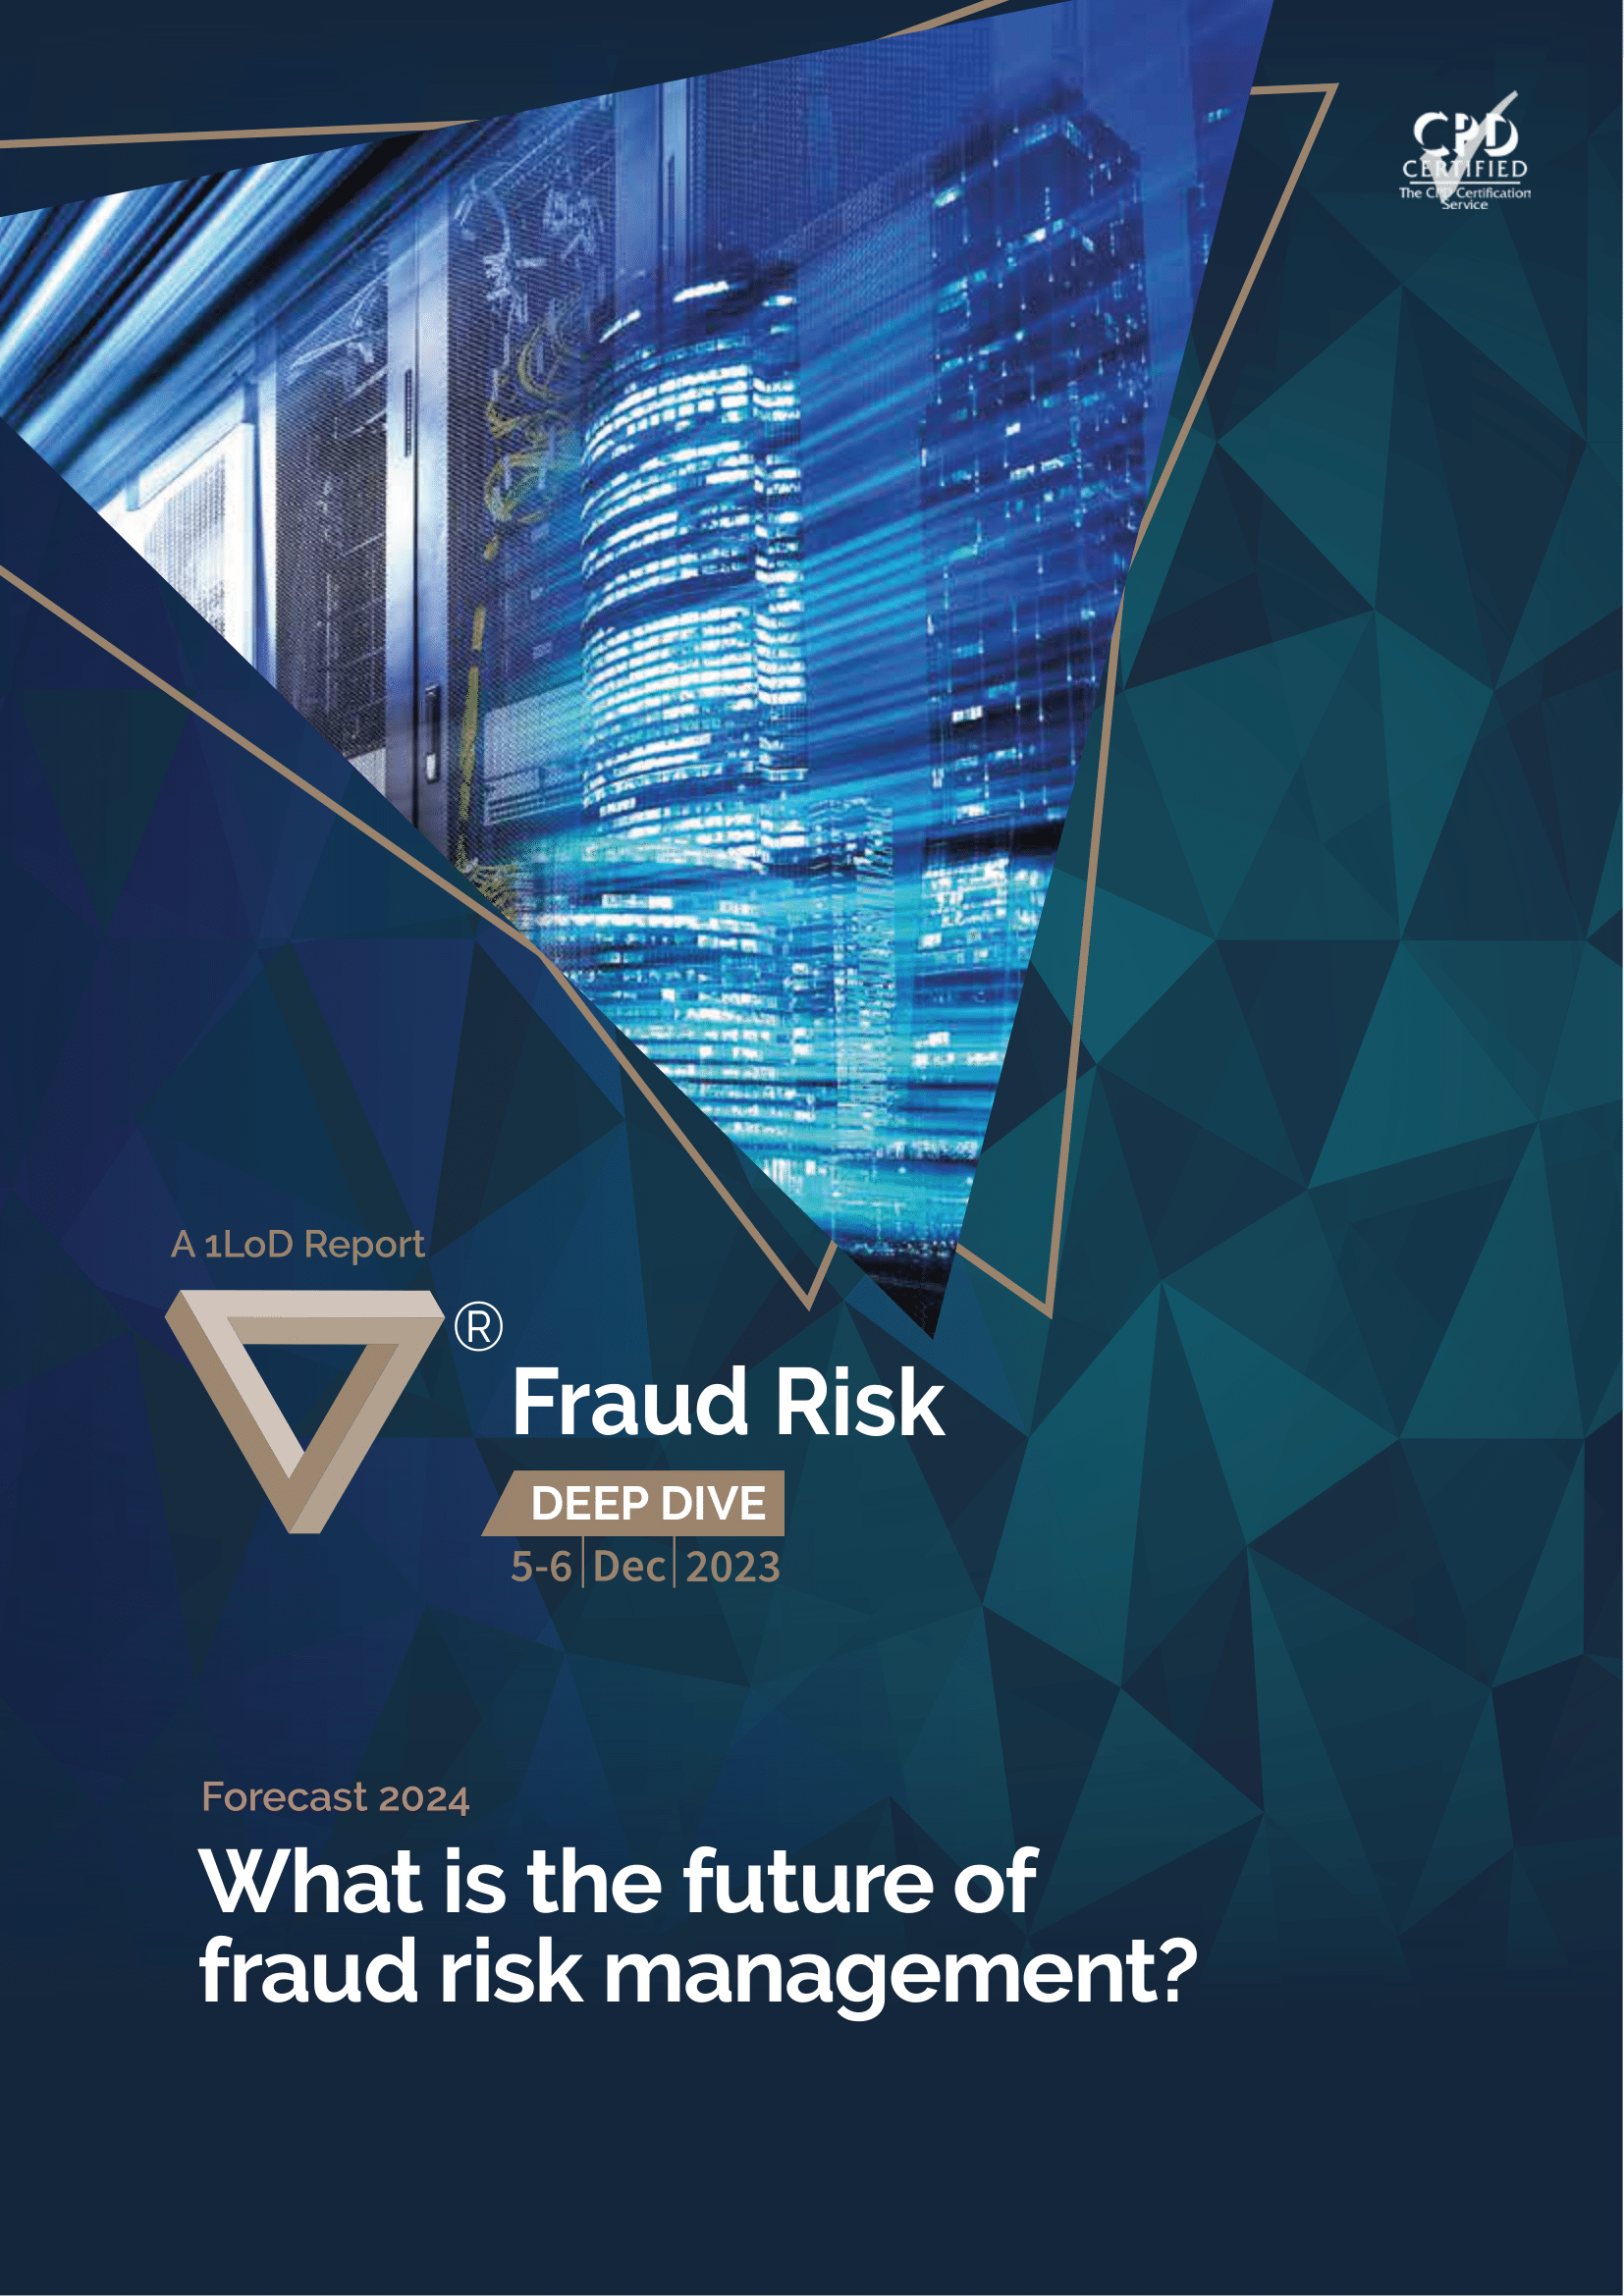 What is the future of fraud risk management?